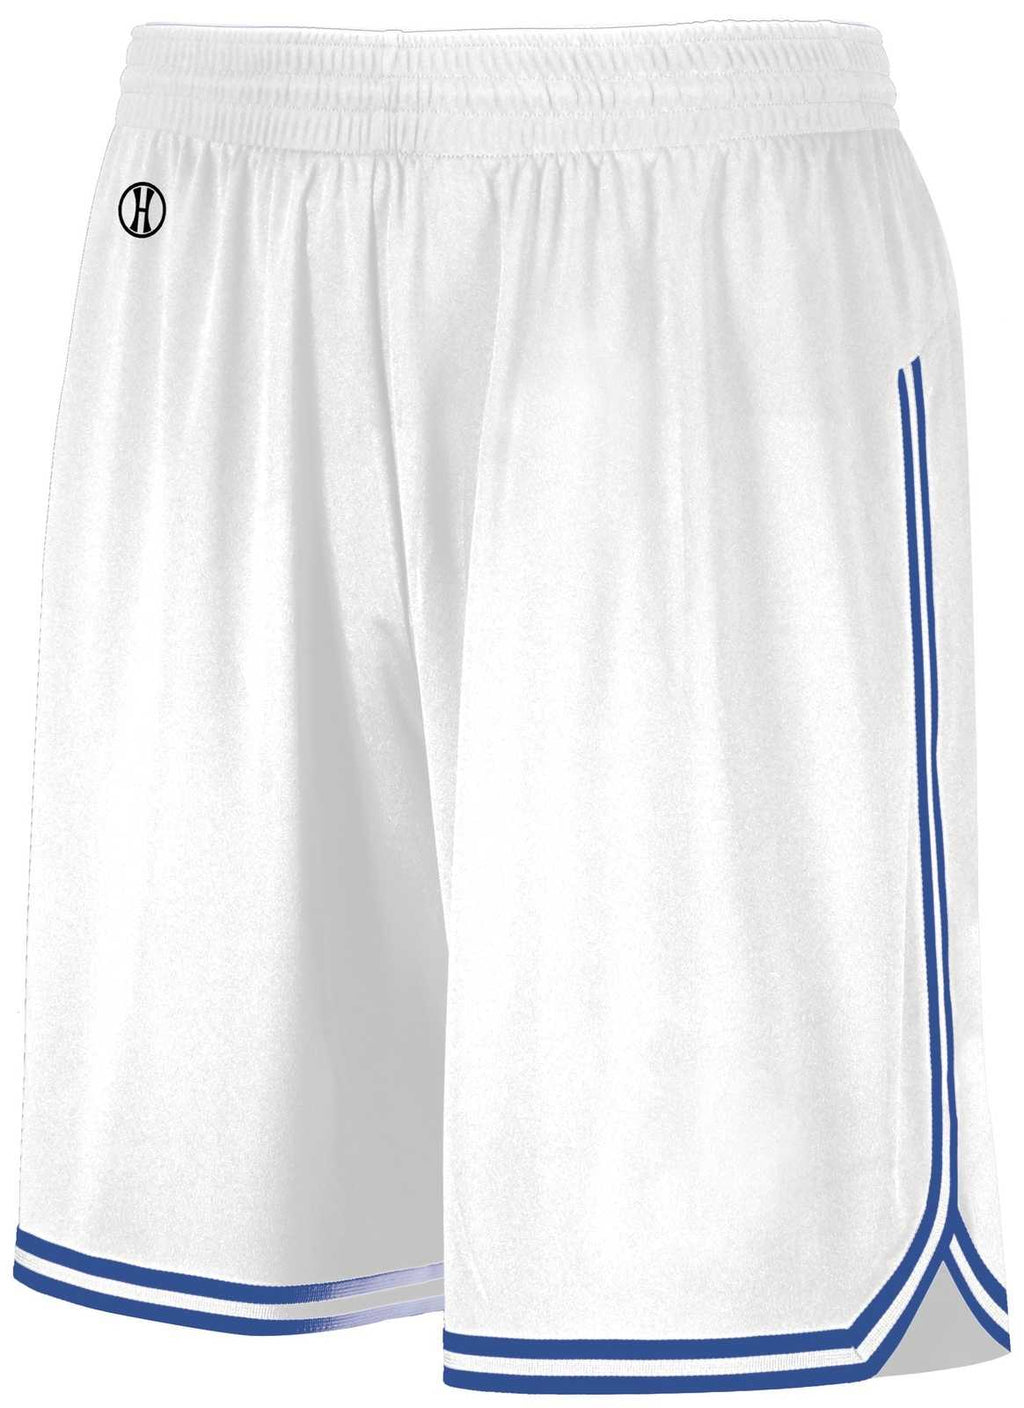 Los Angeles Lakers Nike Classic Edition Swingman Shorts - Youth